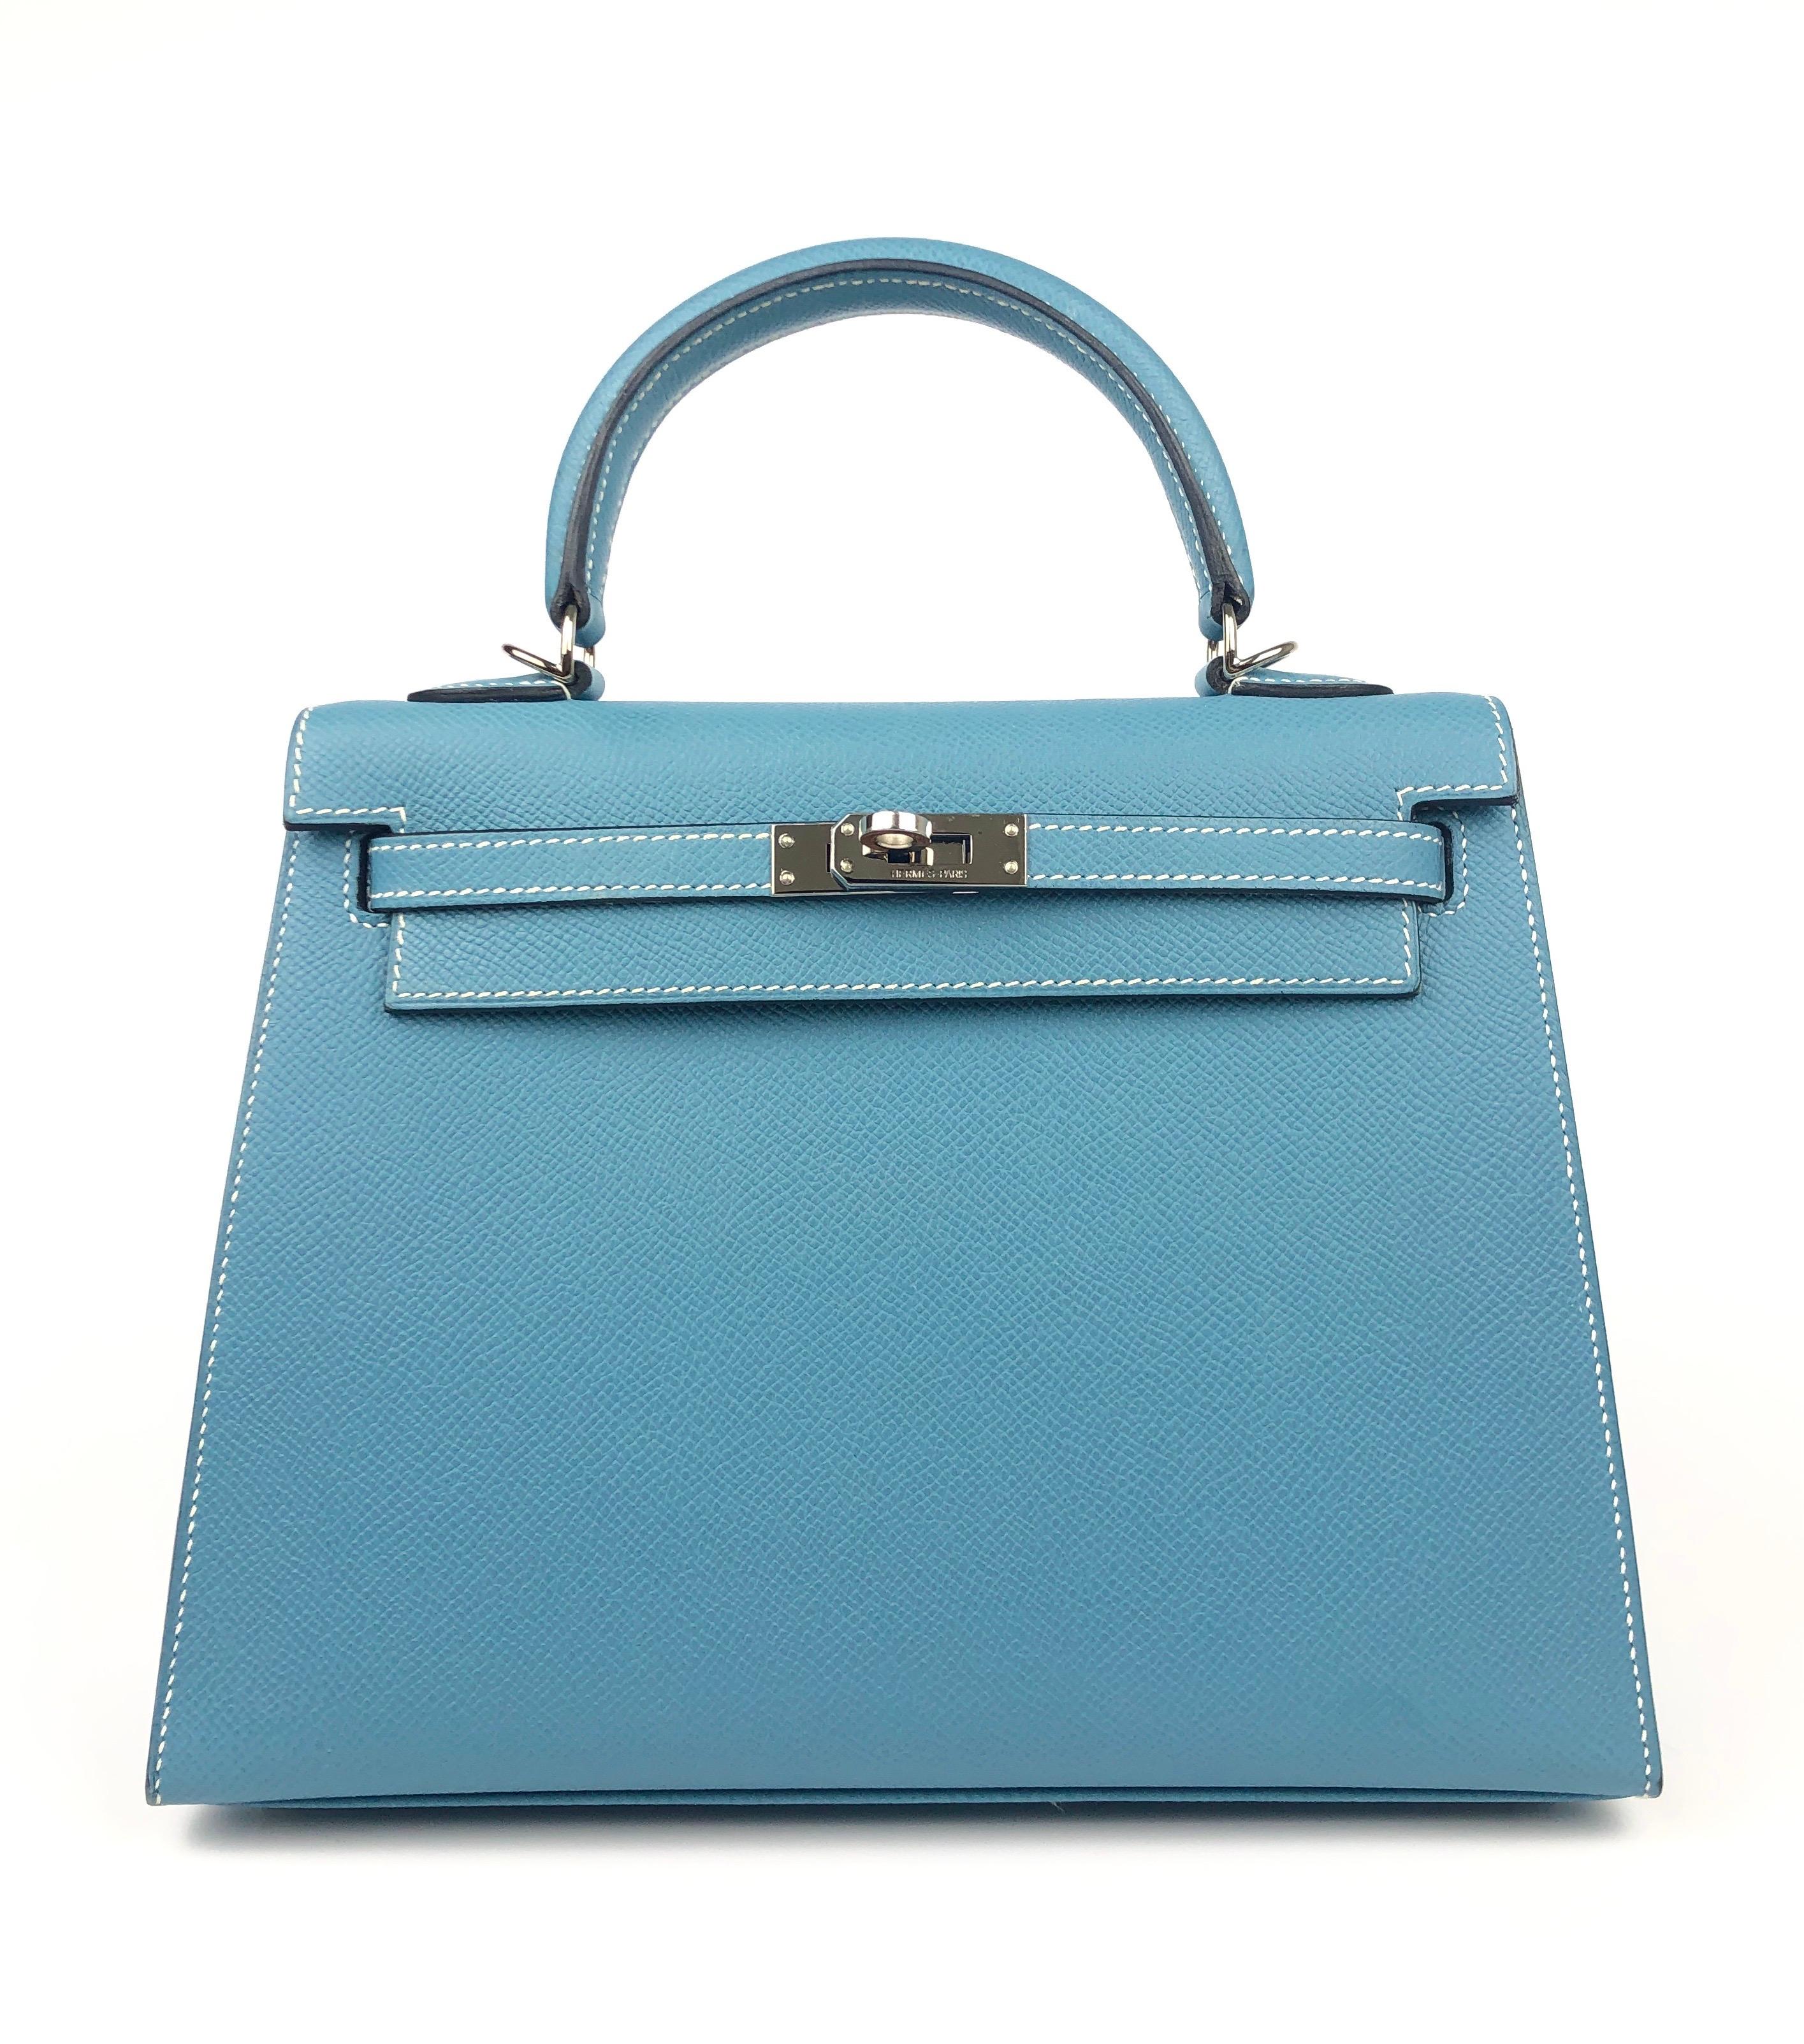 Stunning Hermes Kelly 25 Blue Jean Epsom Sellier Palladium Hardware. Excellent Condition, Hairlines on Hardware, excellent structure and corners.

Shop with Confidence from Lux Addicts. Authenticity Guaranteed! 